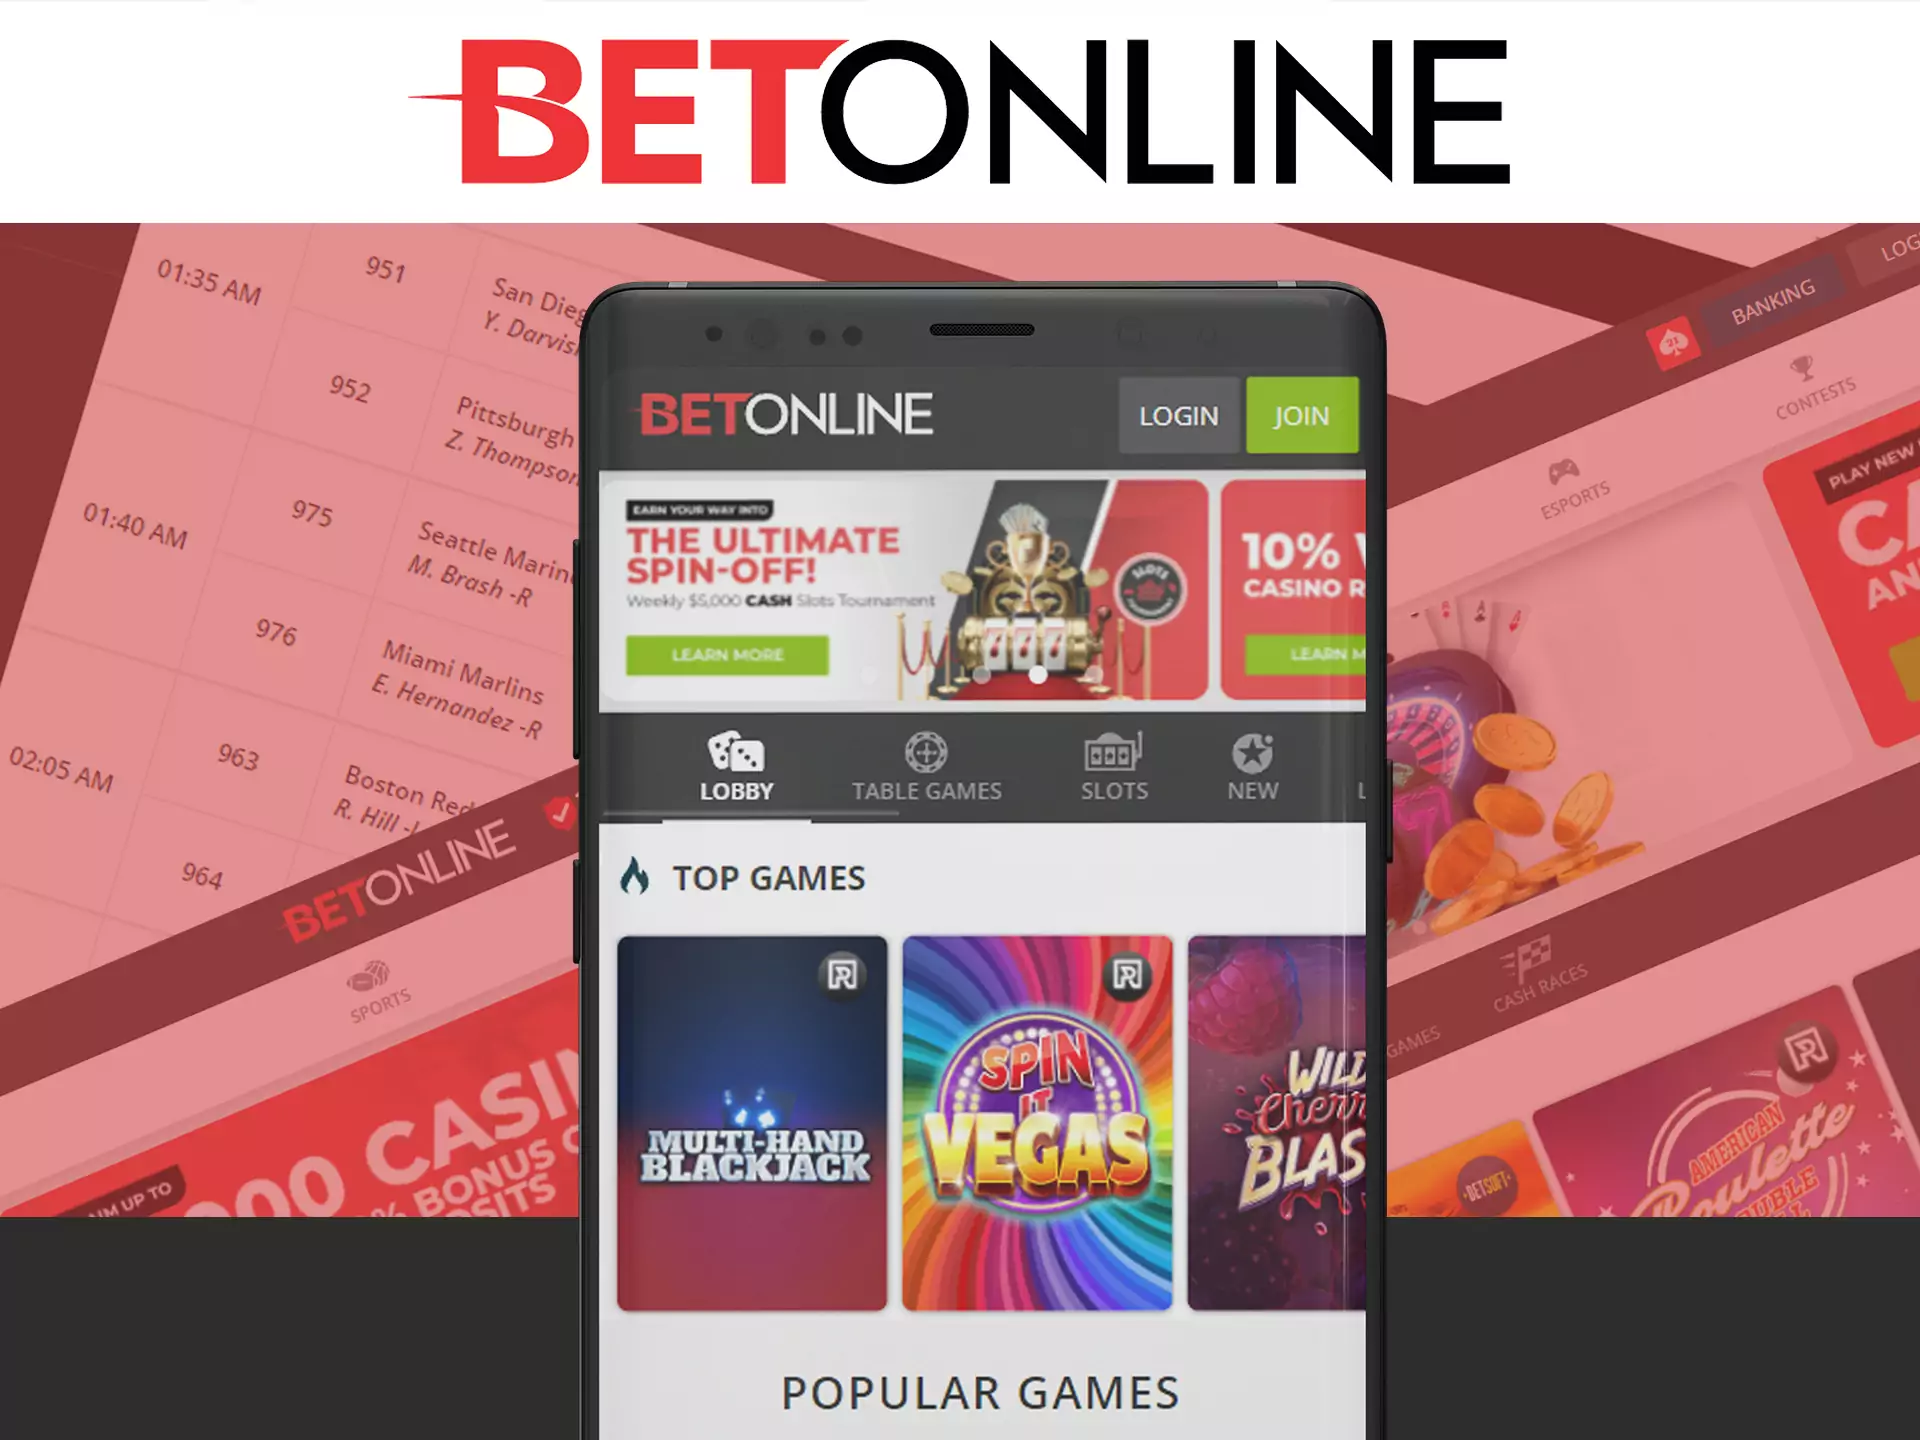 The mobile version of Betonline works steadily on smartphones.